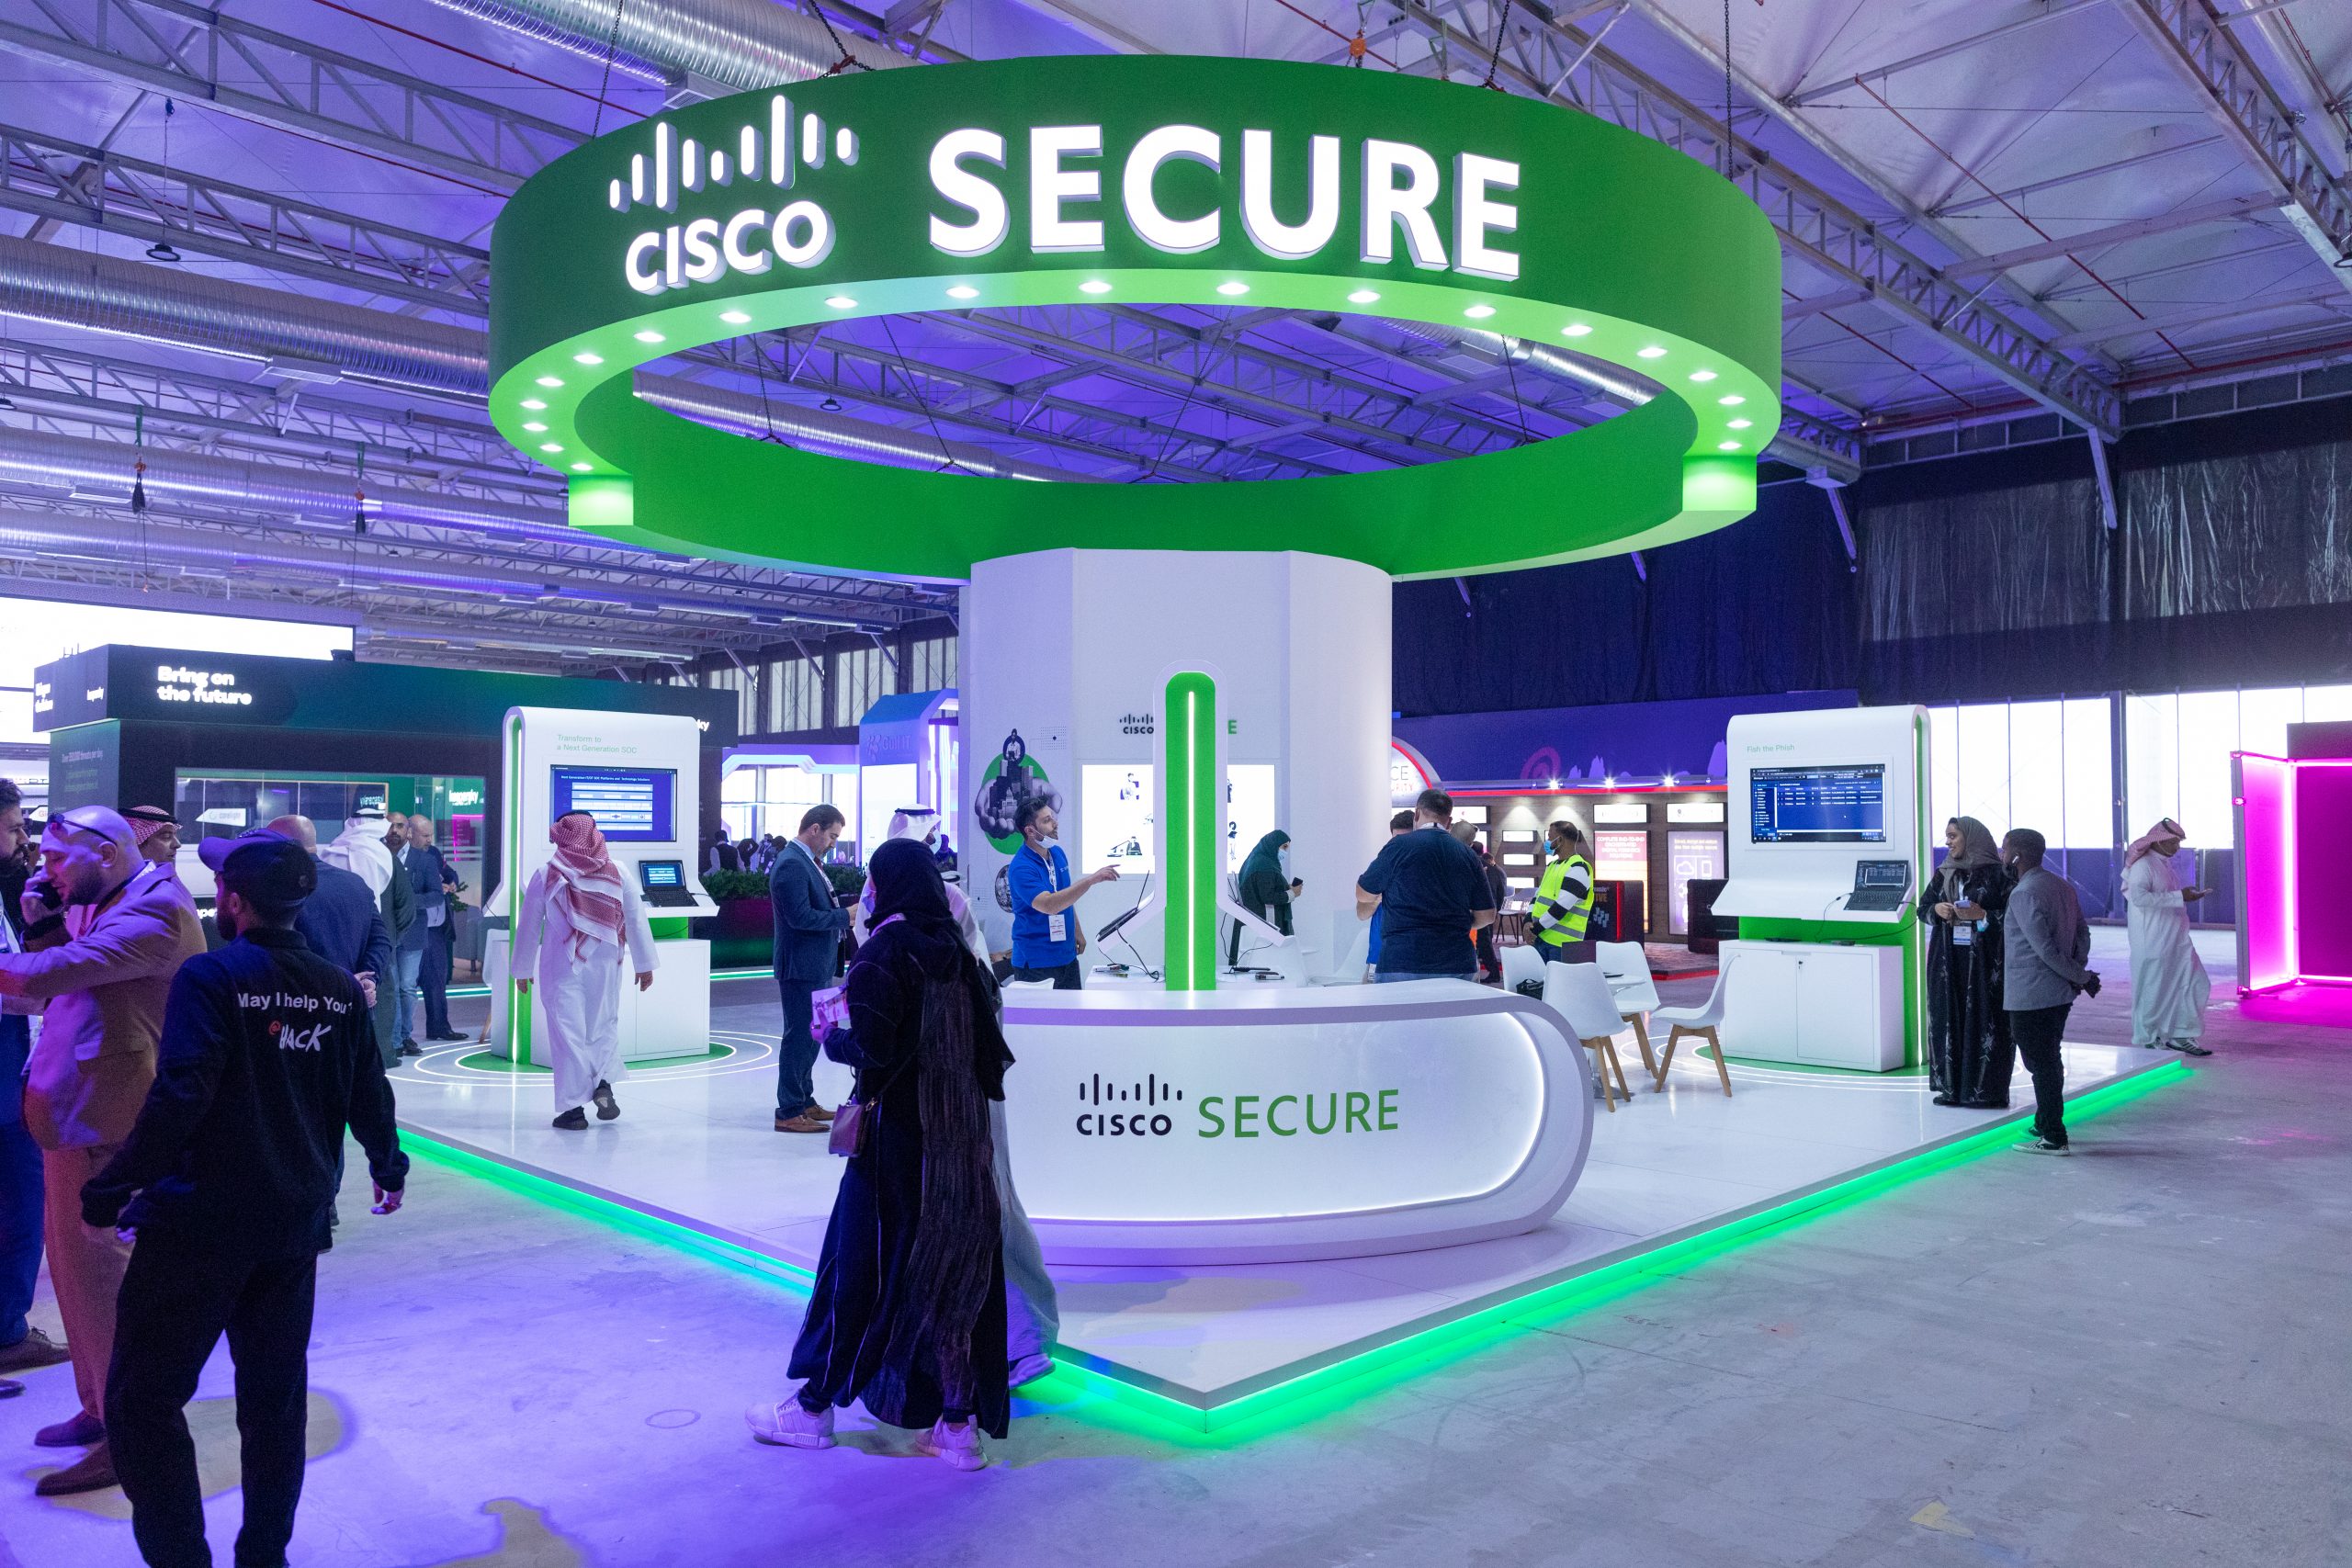 Cisco secure booth at event